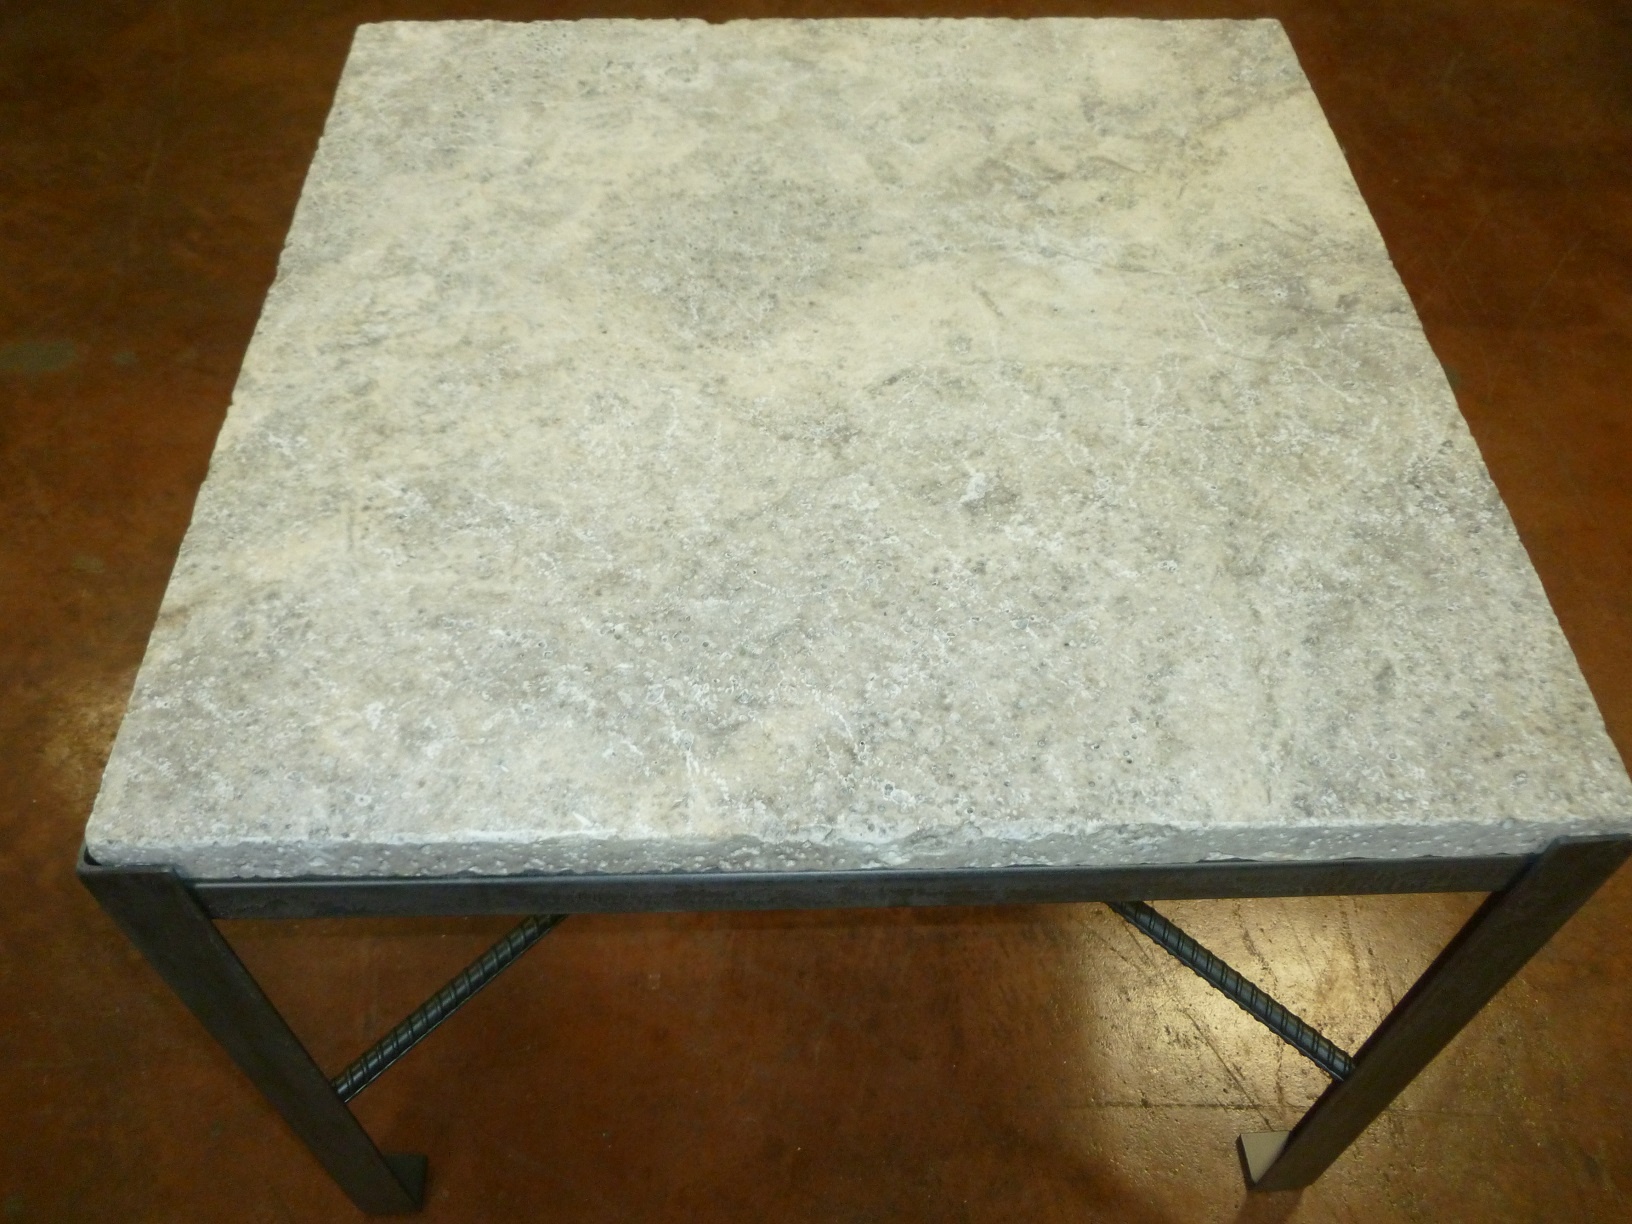 Ferro Designs LLC custom iron end table with a steel finish and a travertine tile top.